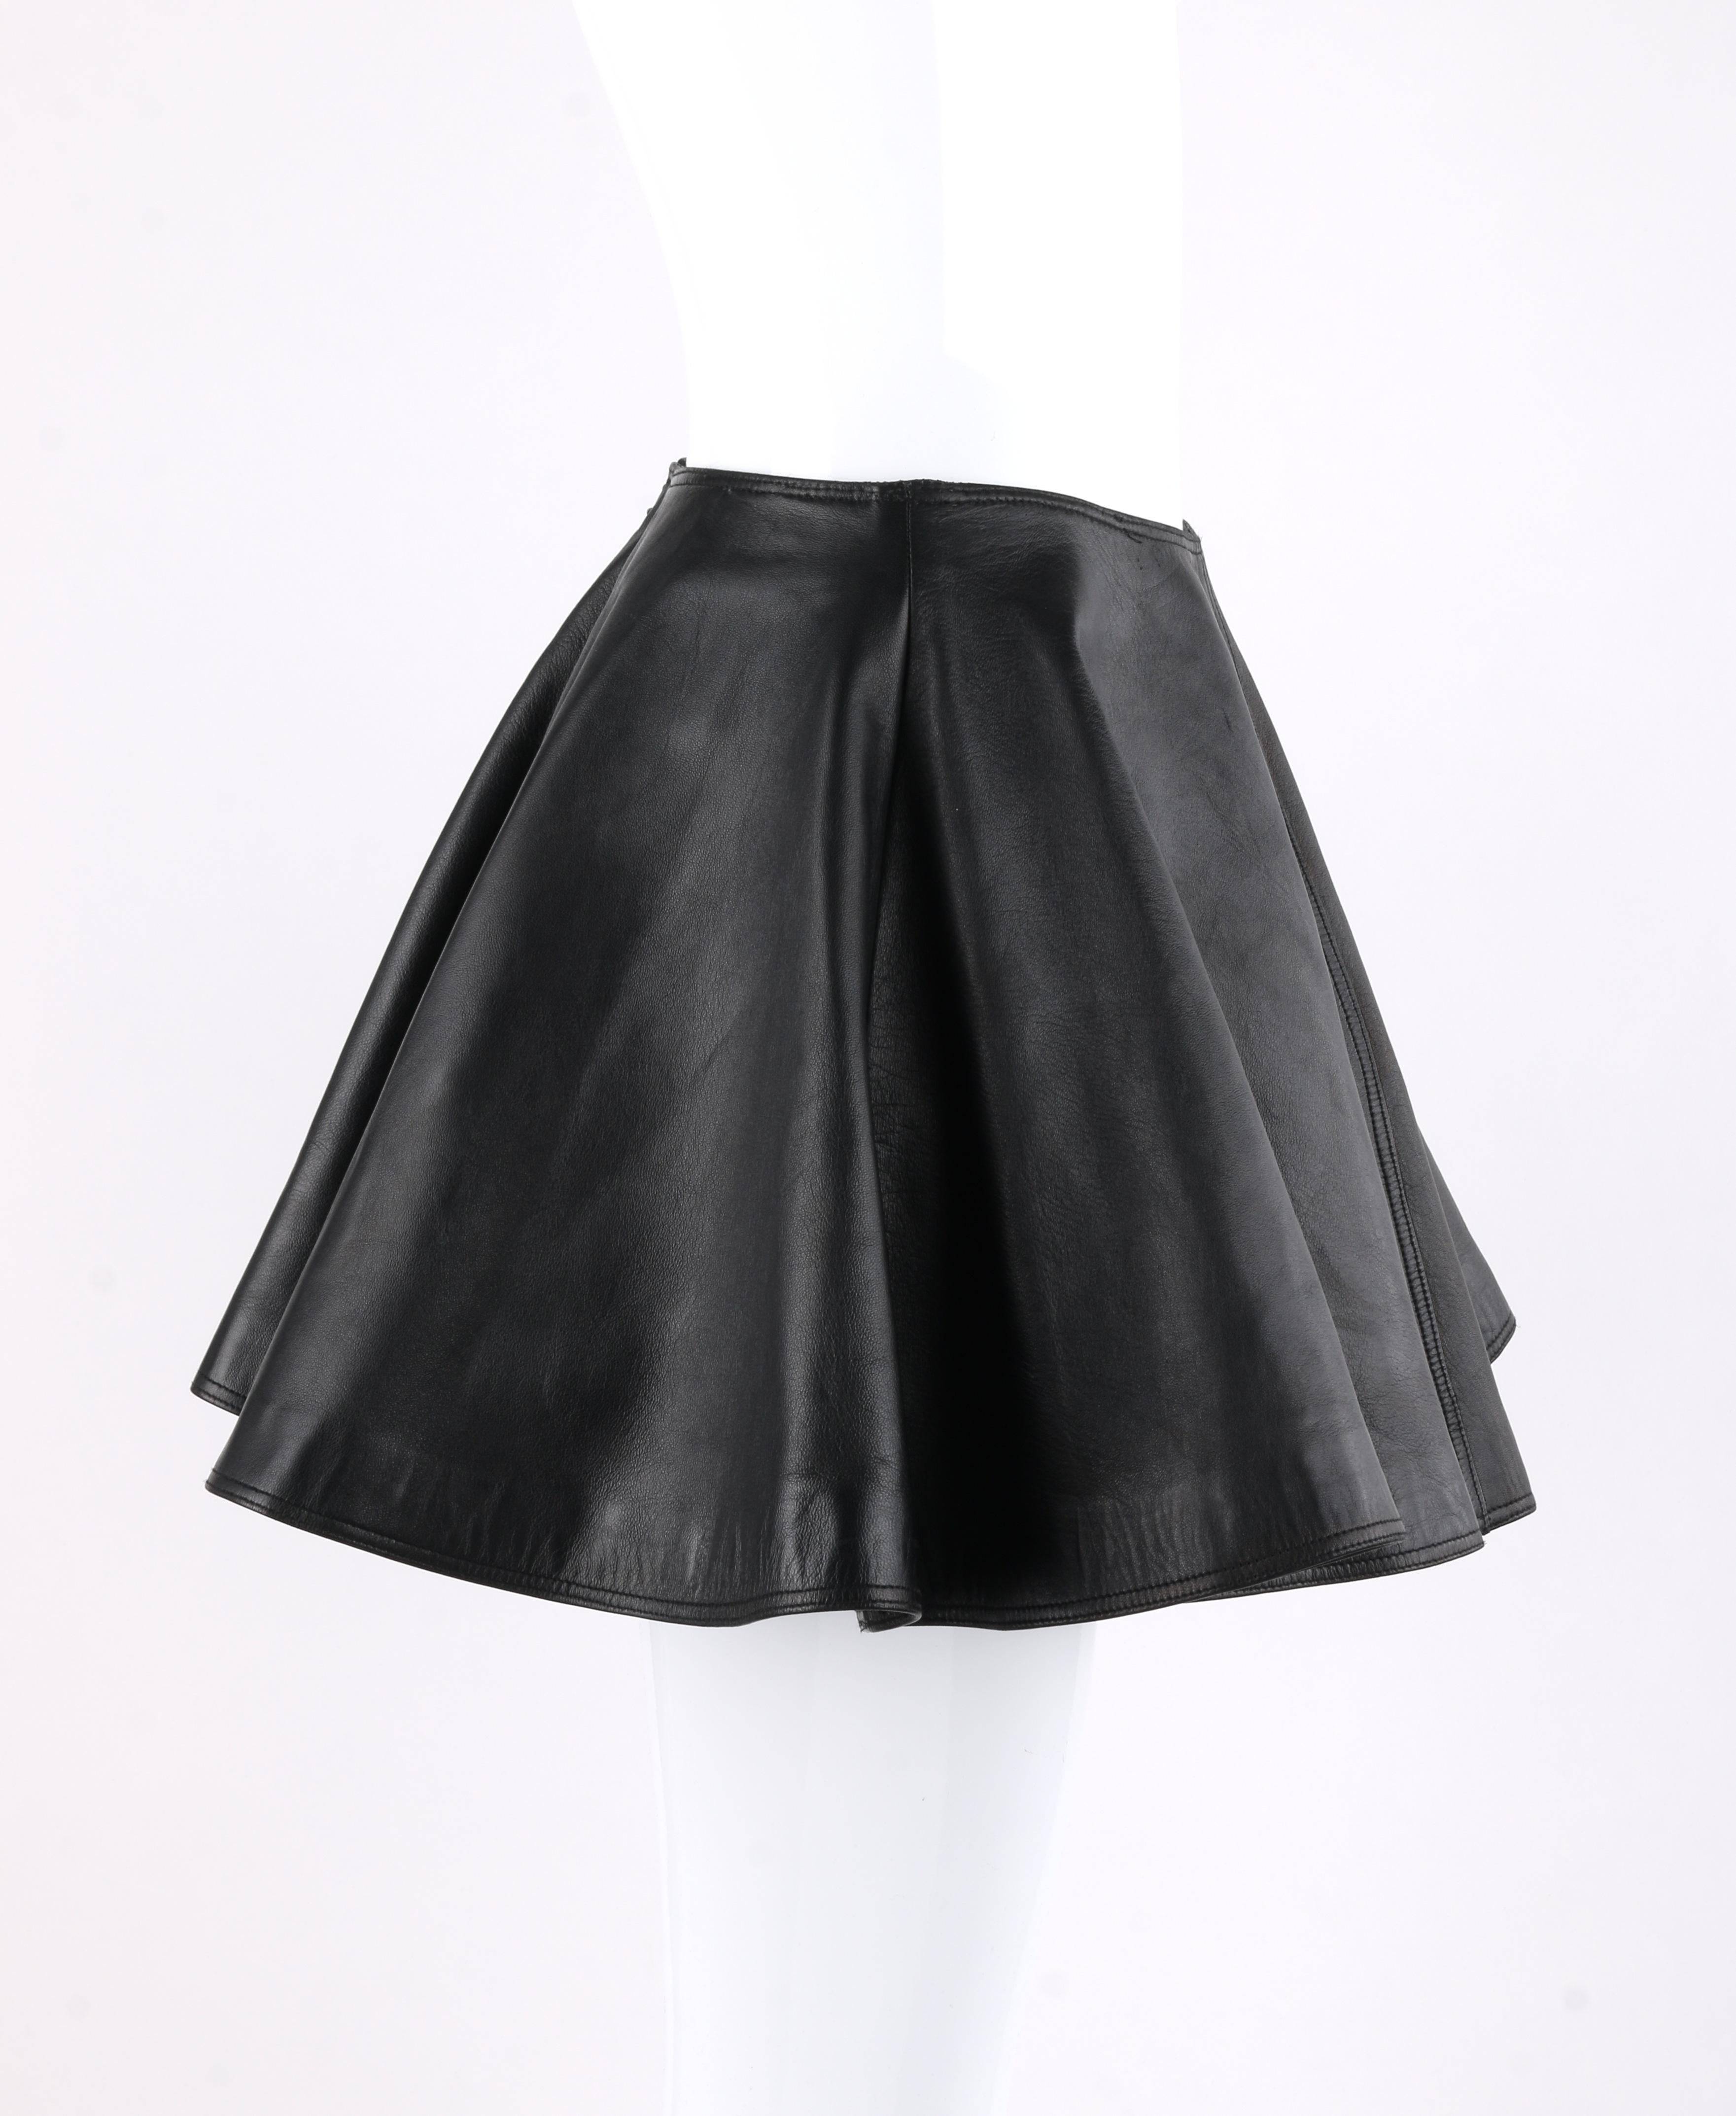 GIANNI VERSACE A/W 1994 Black Leather A-Line Micro Mini Circle Skirt
 
Collection: Autumn / Winter 1994
Brand / Manufacturer: Gianni Versace
Designer: Gianni Versace
Style: Micro-mini skirt
Color(s): Black 
Lined: Yes
Marked Fabric Content: “100%